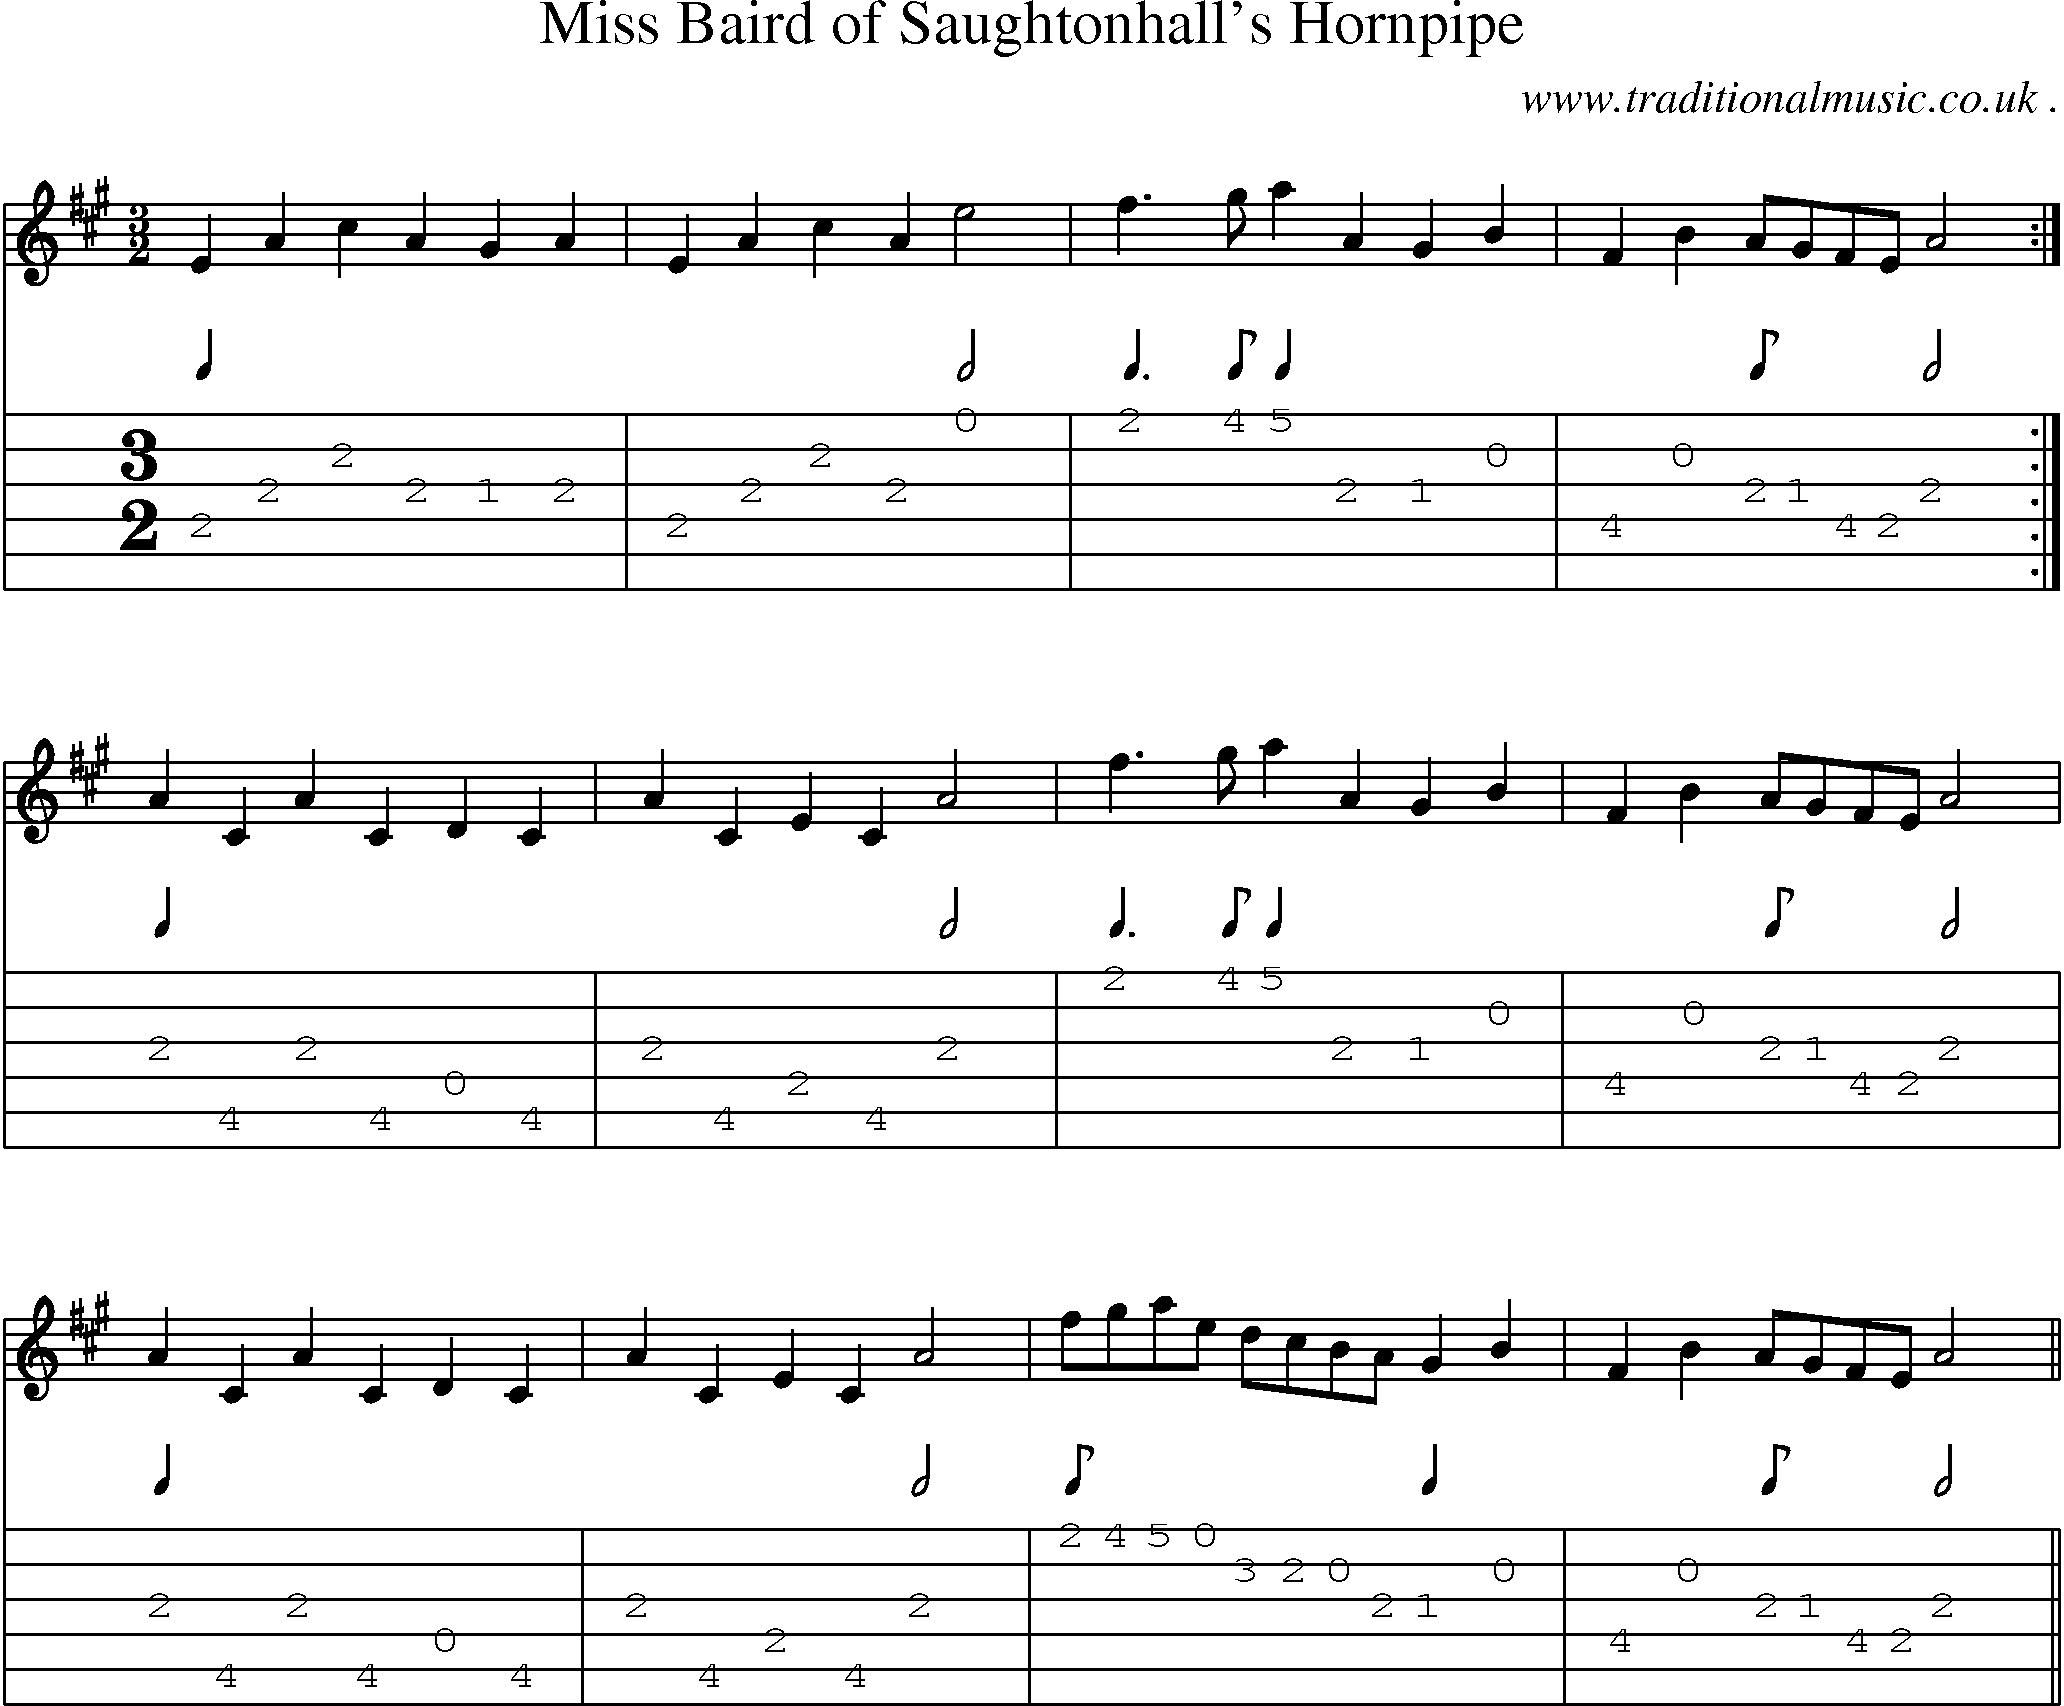 Sheet-Music and Guitar Tabs for Miss Baird Of Saughtonhalls Hornpipe